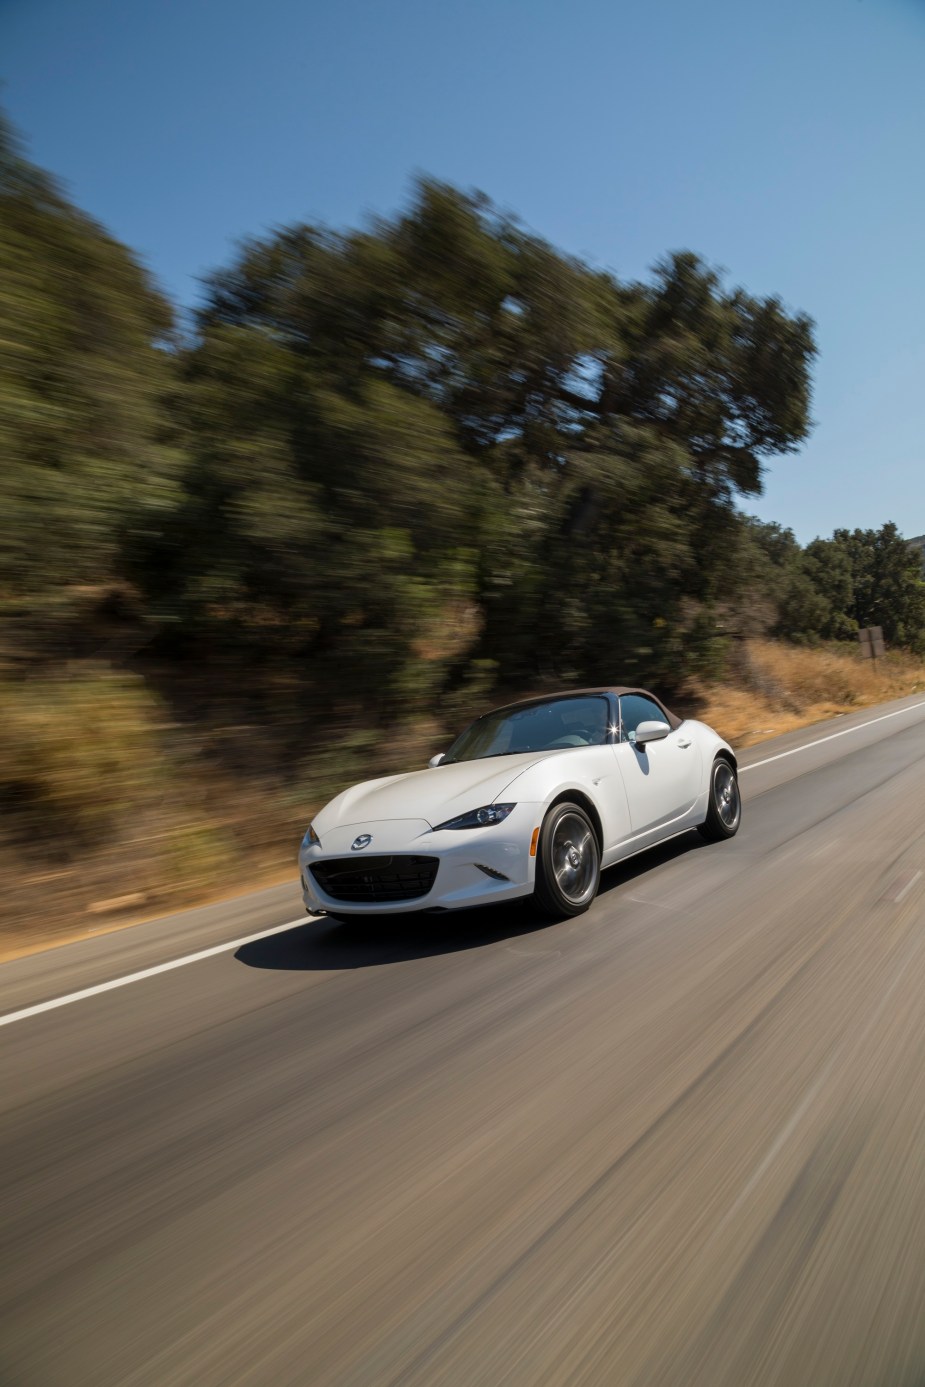 The 2022 Mazda MX-5 tops the list of the most fuel-efficient cars with fun, quick qualities.